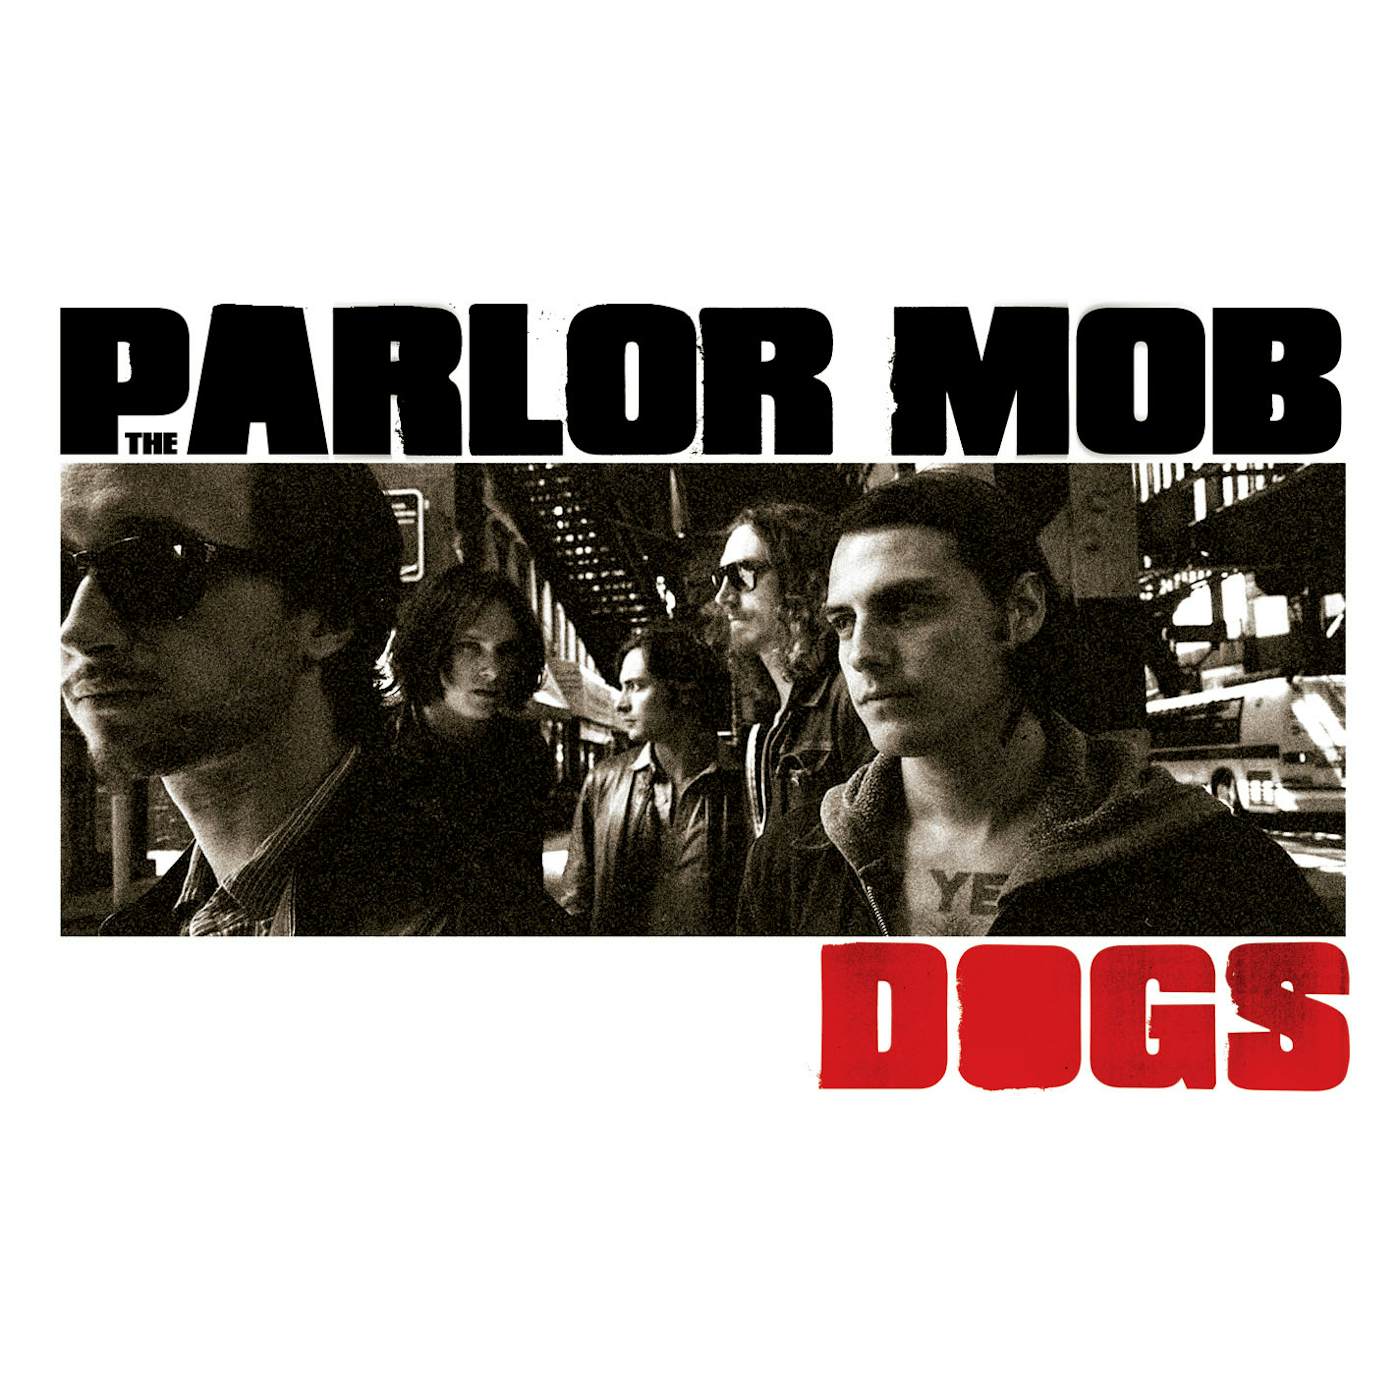 The Parlor Mob Dogs CD